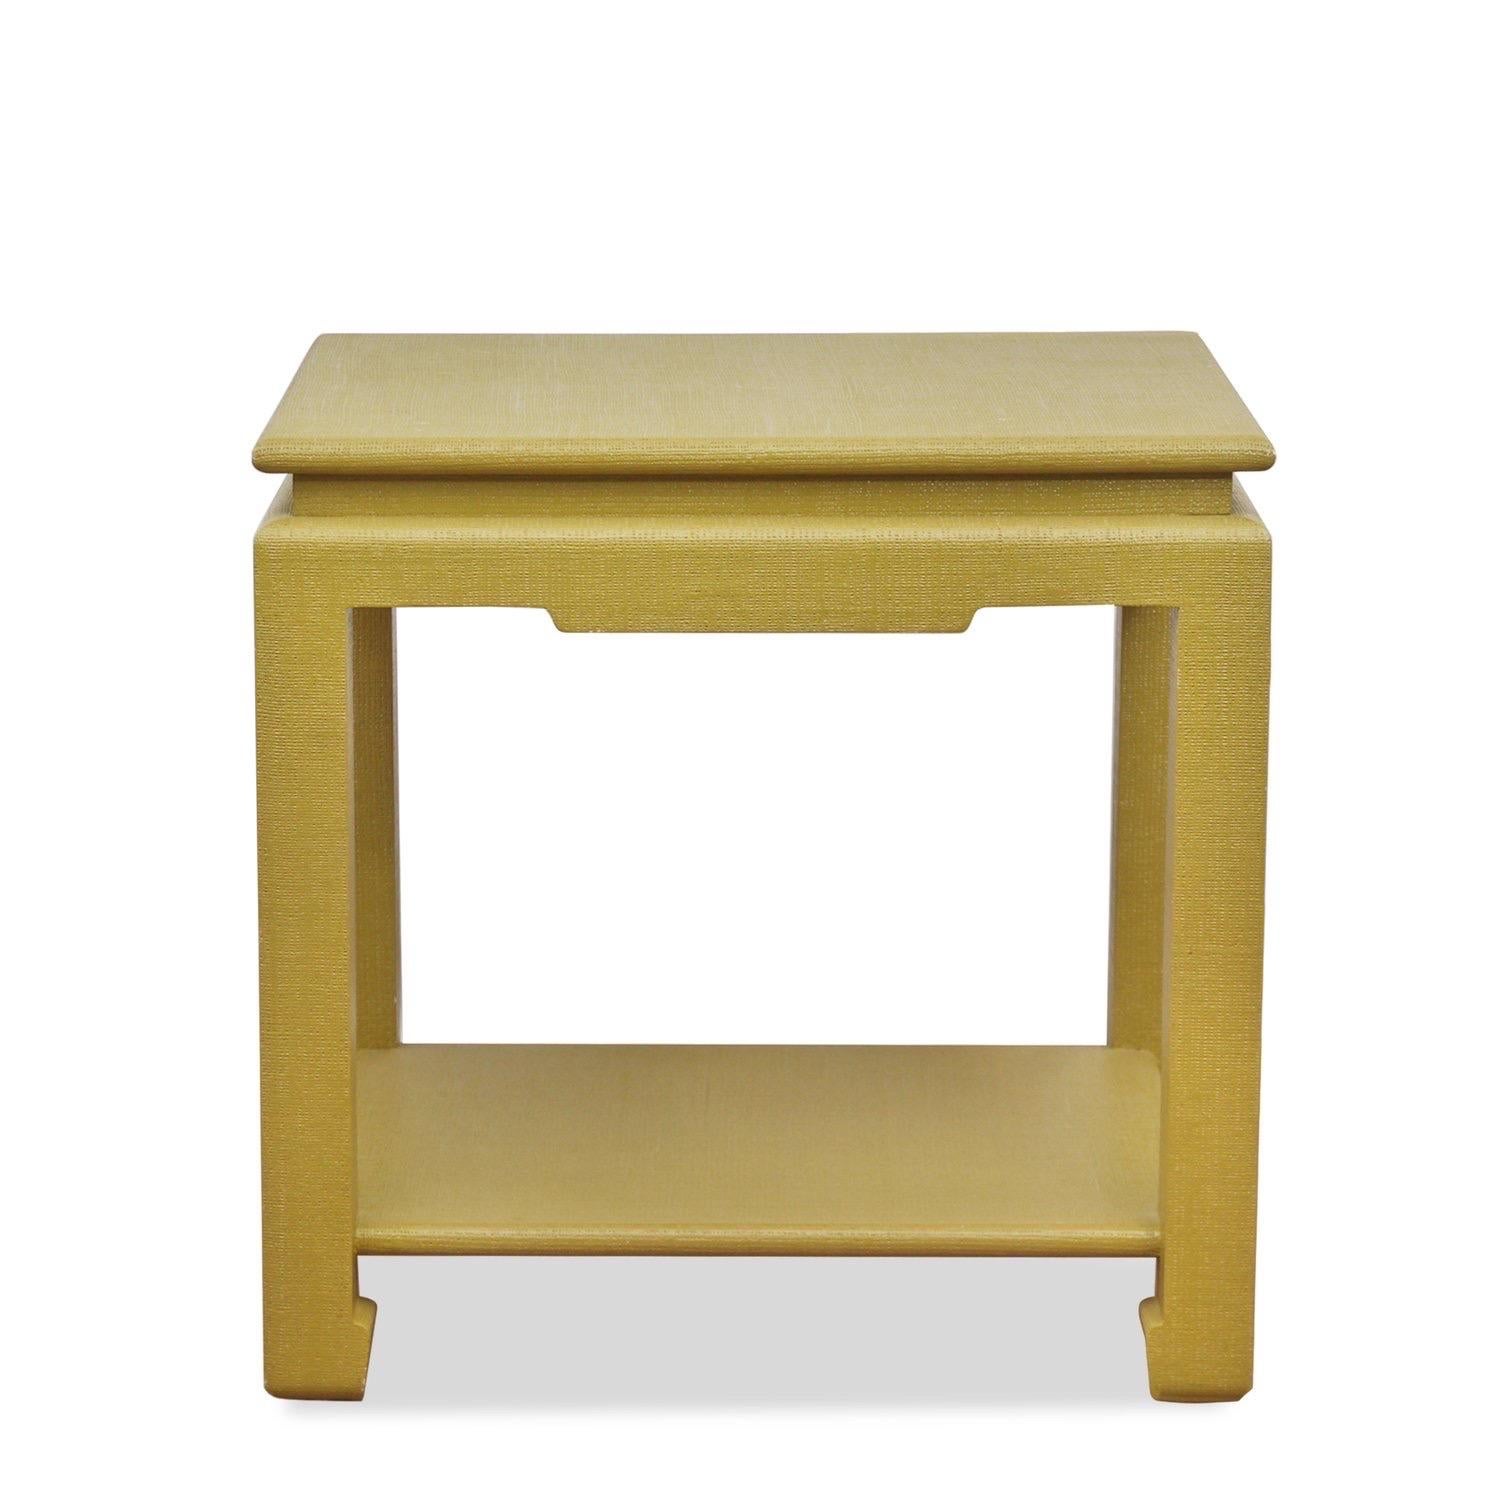 Rectangular wood end table in beige lacquered linen.  Possibly Karl Springer; unsigned.

USA, circa 1970.

Dimensions: 28”L x 24”D x 28”H

Good/pre-owned condition; some signs of vintage wear.